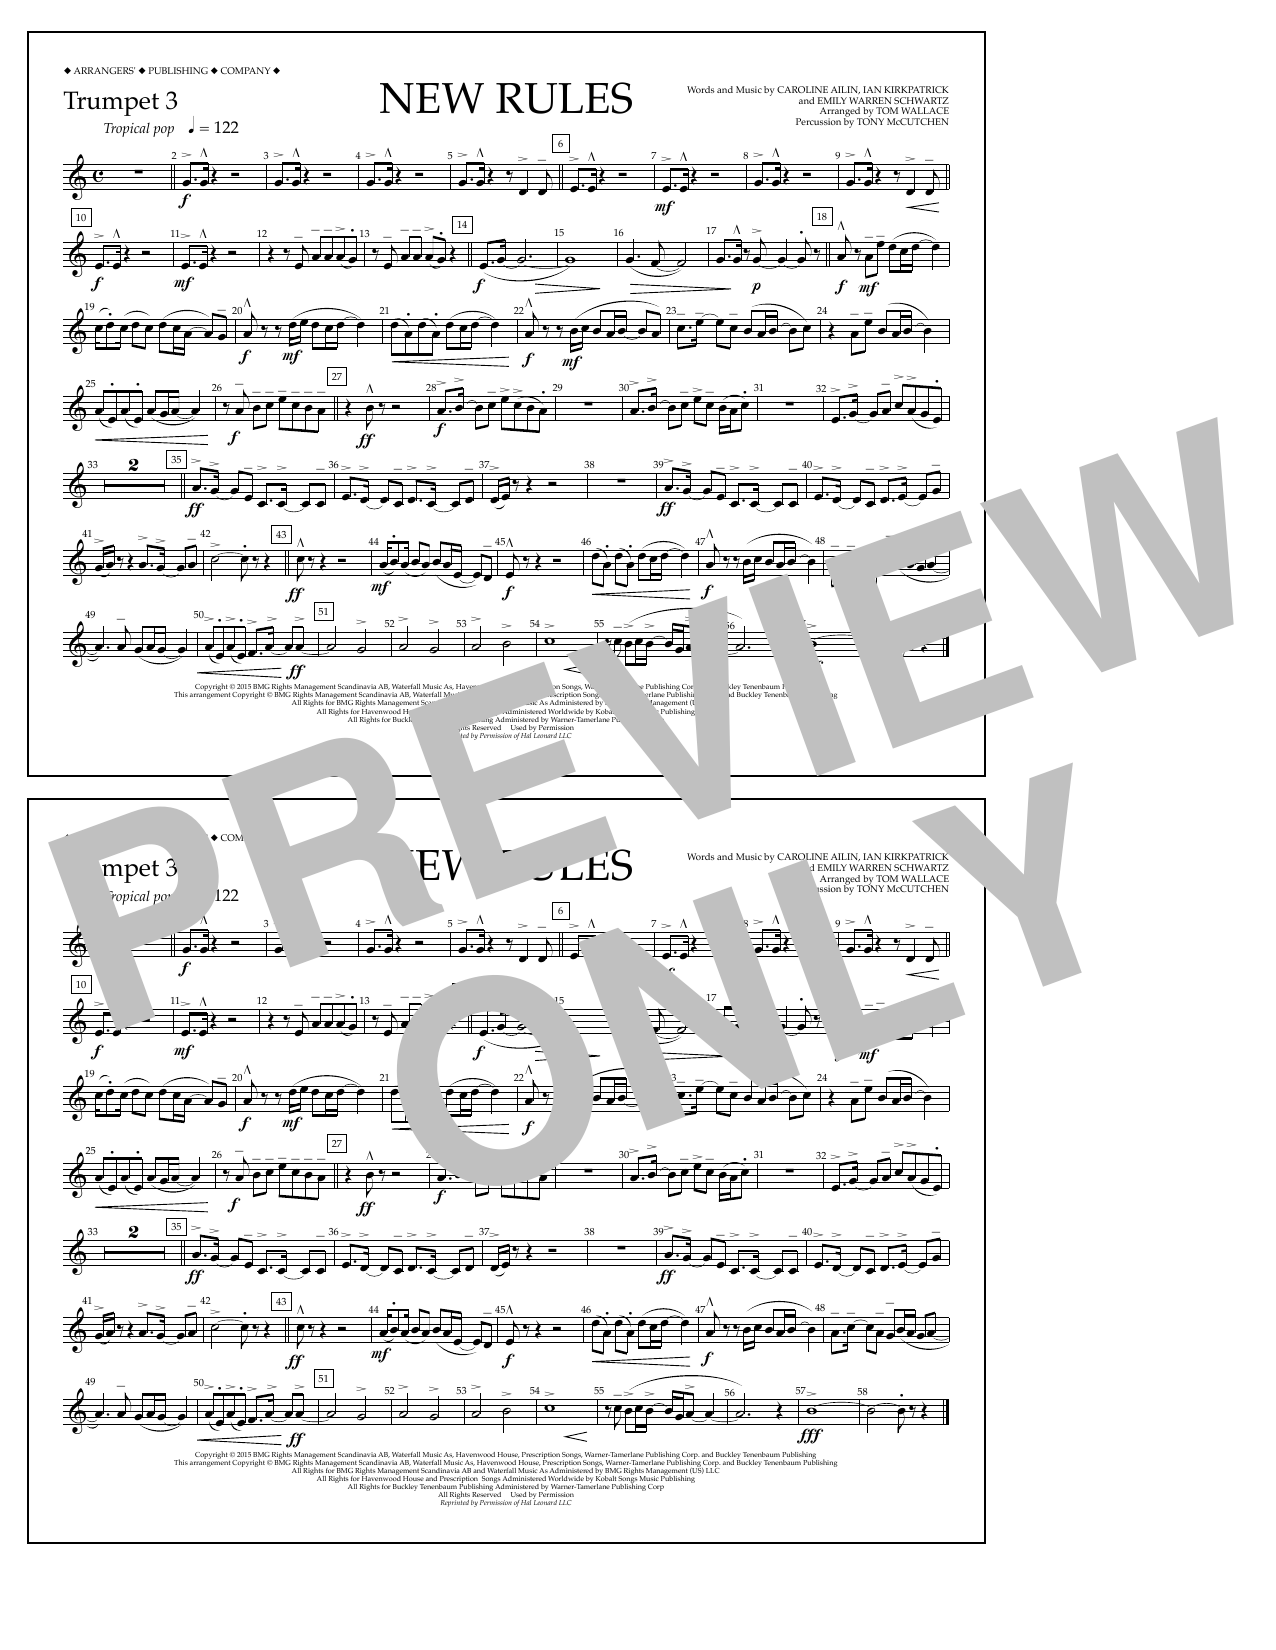 Download Tom Wallace New Rules - Trumpet 3 Sheet Music